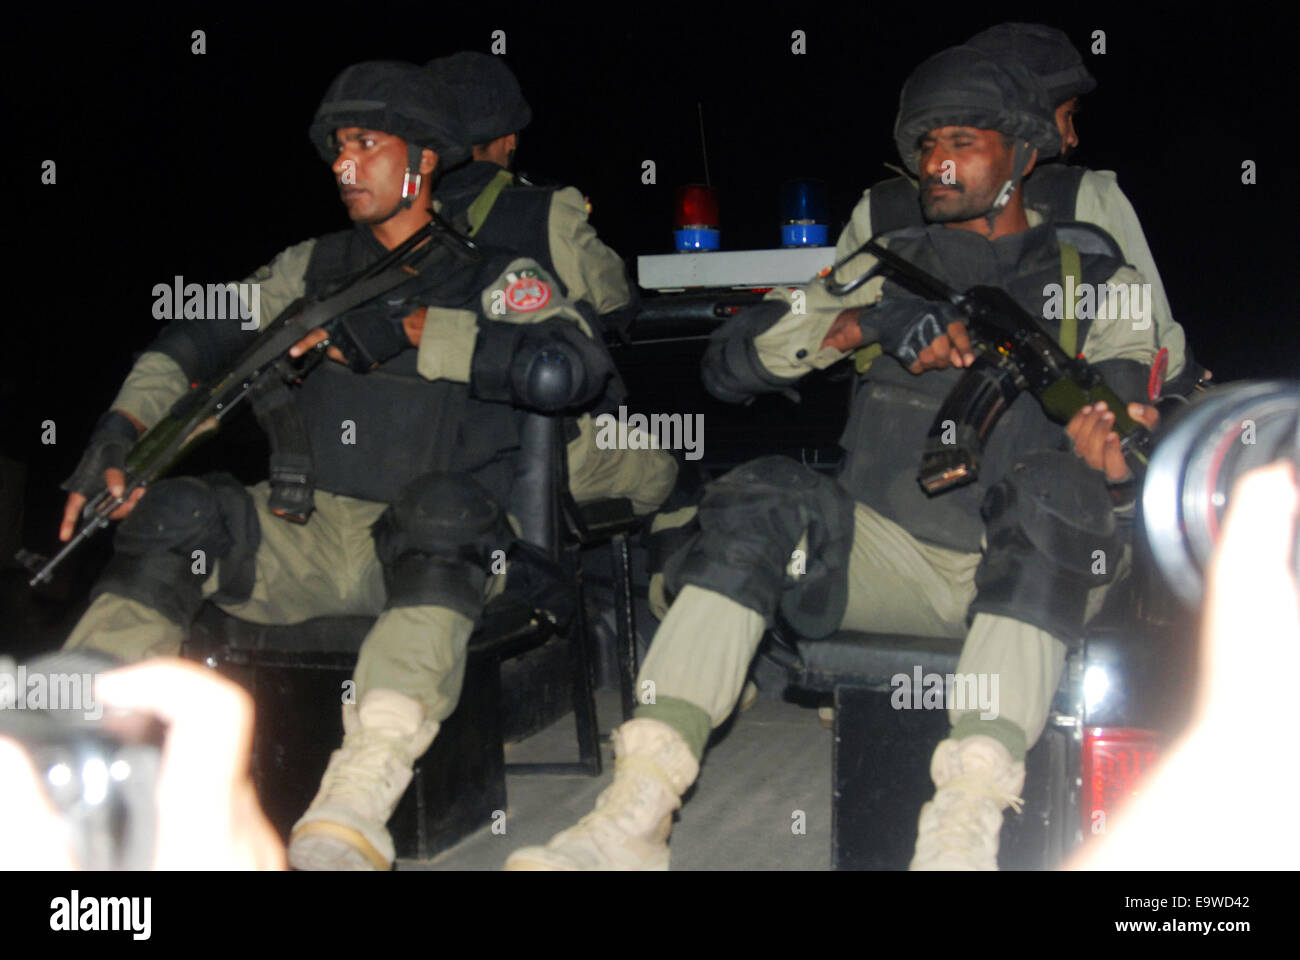 Lahore. 2nd Nov, 2014. Pakistani paramilitary troops patrol near the site of a suicide bomb attack at Wagah border in eastern Pakistan's Lahore, Nov. 2, 2014. At least 55 people were killed and 118 others injured in a suicide blast that took place near Wagah crossing point at Pak-India border in Pakistan's eastern city of Lahore on Sunday evening, police officials said. © Sajjad/Xinhua/Alamy Live News Stock Photo